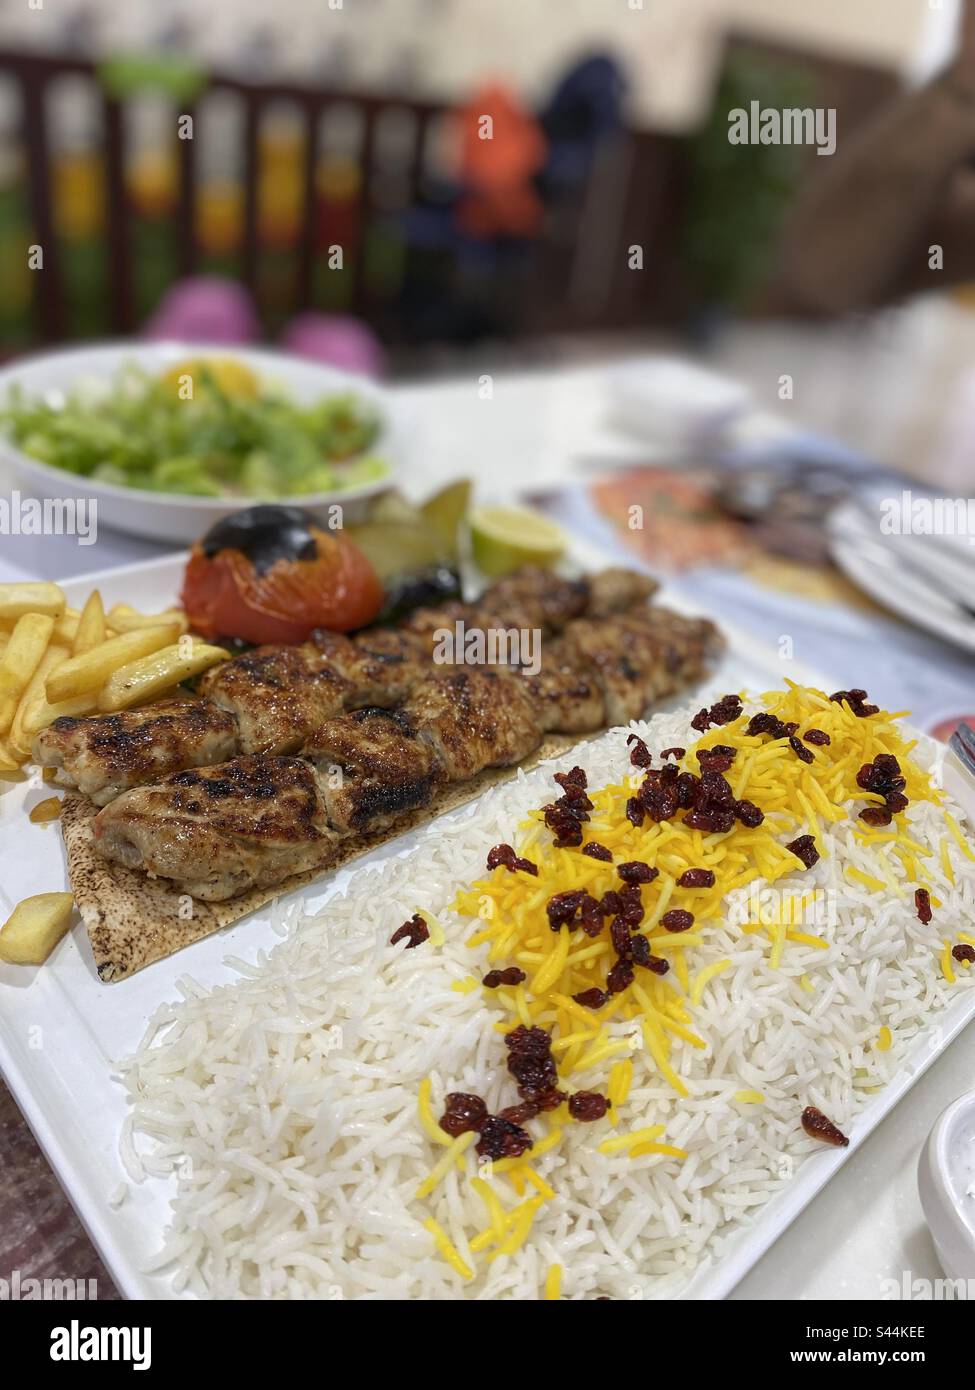 Arabic meal and salad Stock Photo